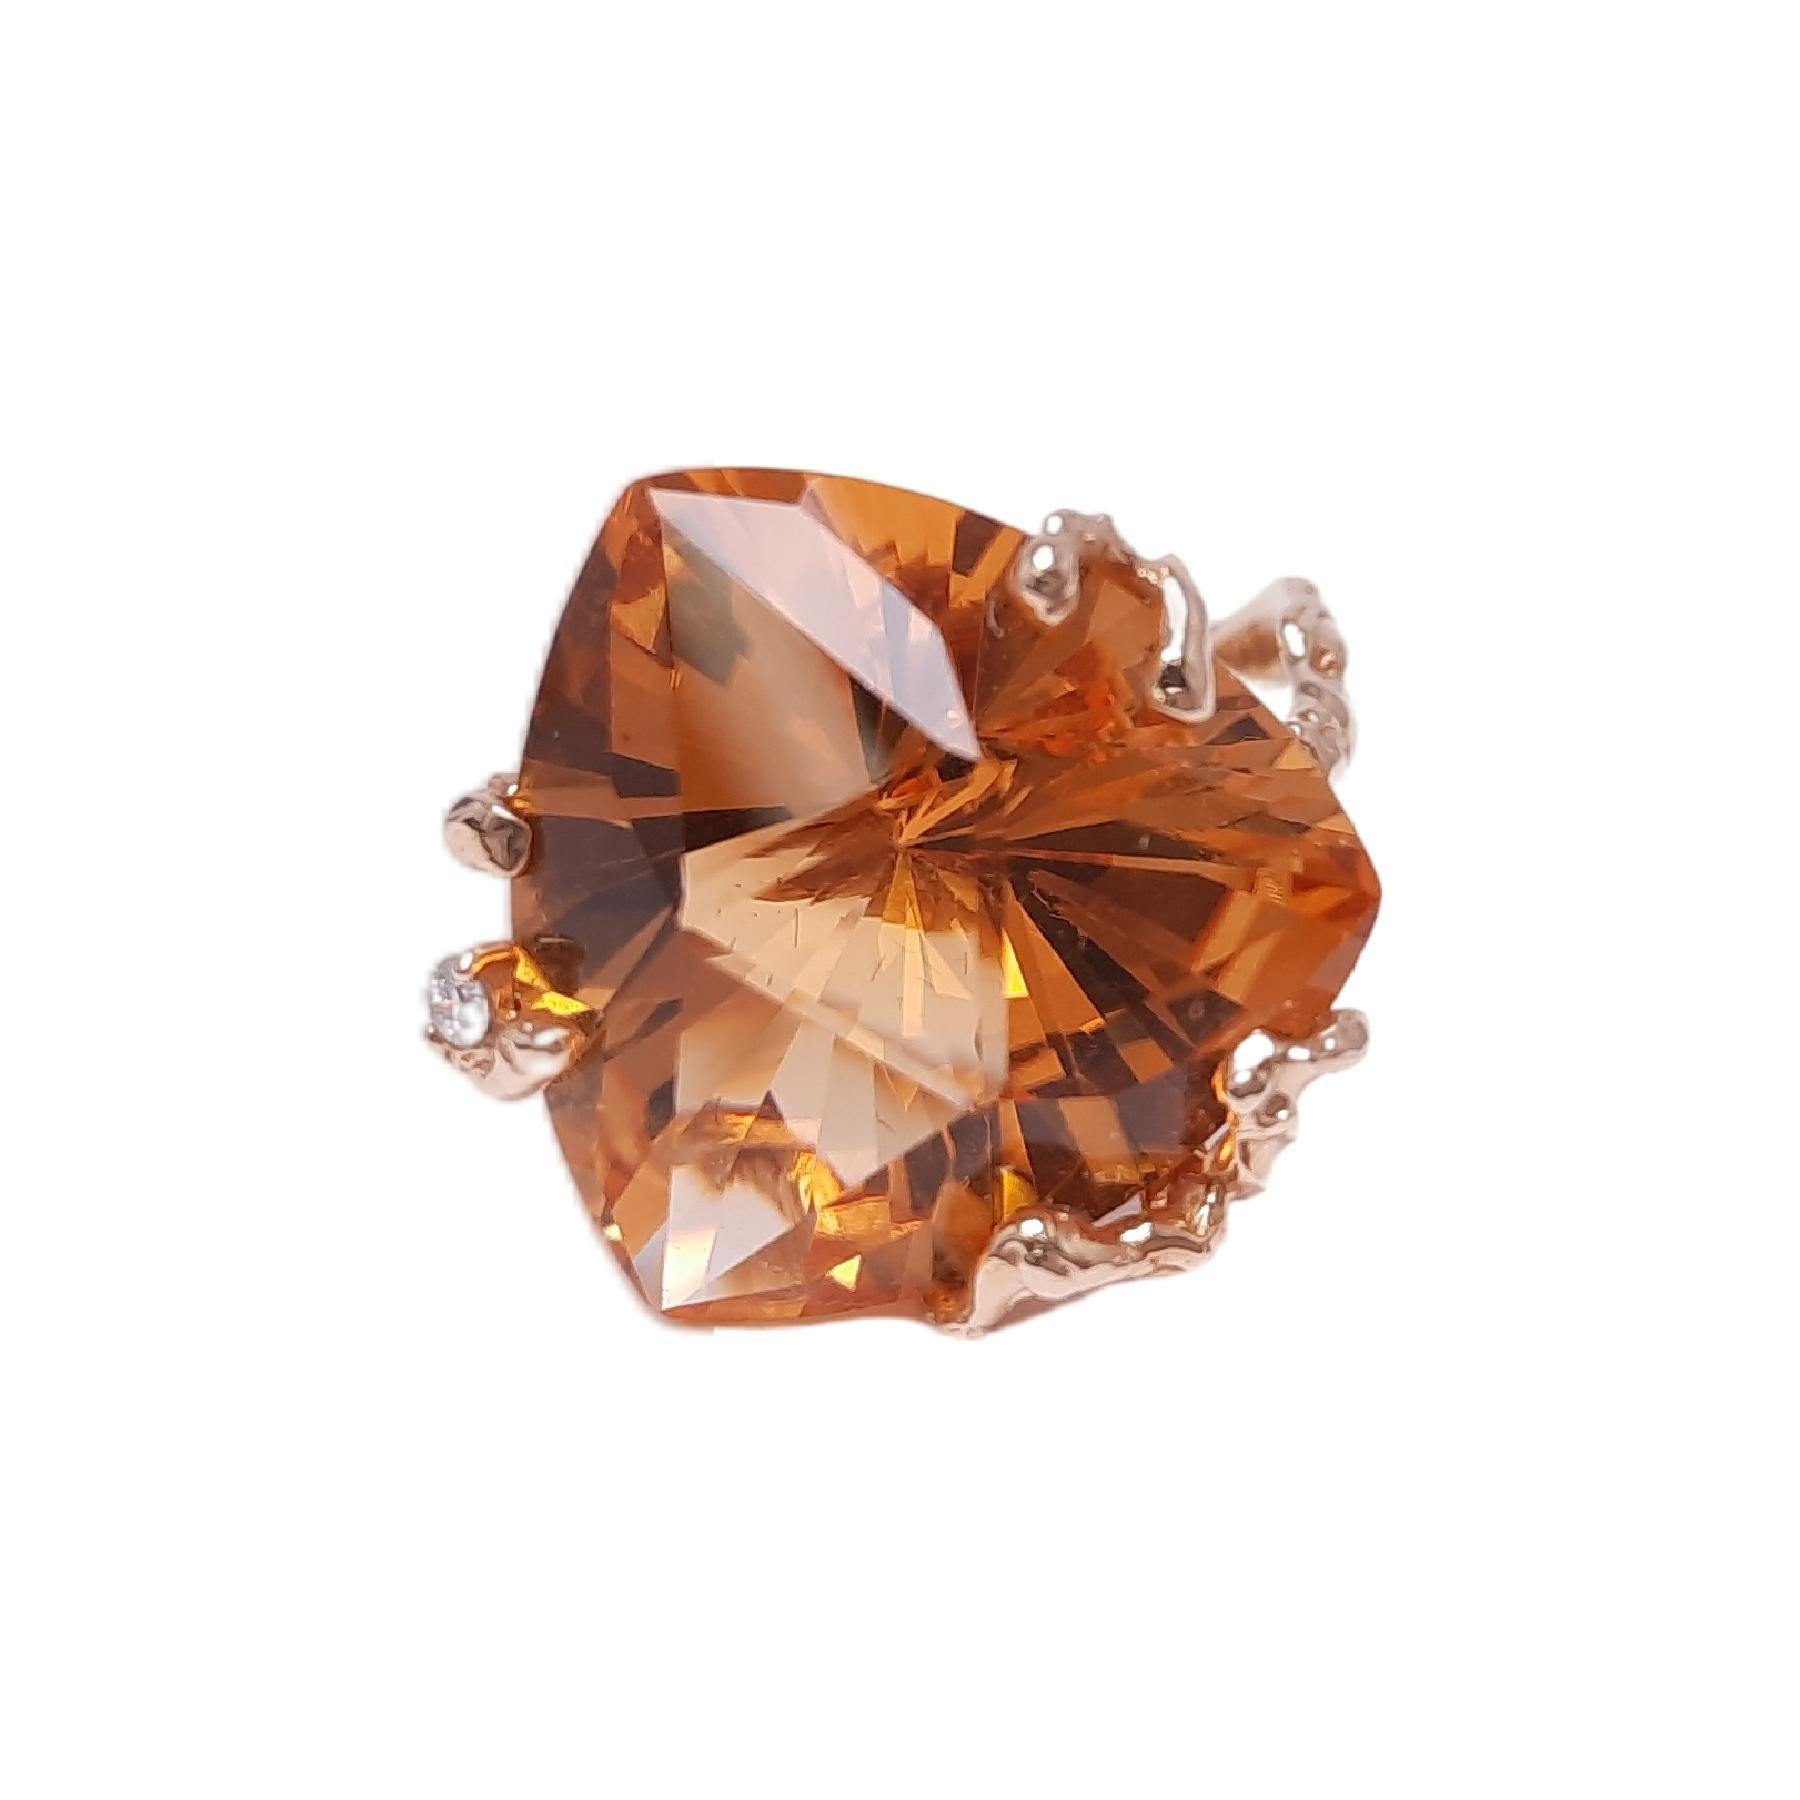 Citrine, which has a sun-like warm colour, is the best symbol representing the wealth, luck, and success. 20ct vivid citrine sits on the twig-like sophisticated gold frame, emphasizing its stone's bright color and power. The spark of diamonds gives